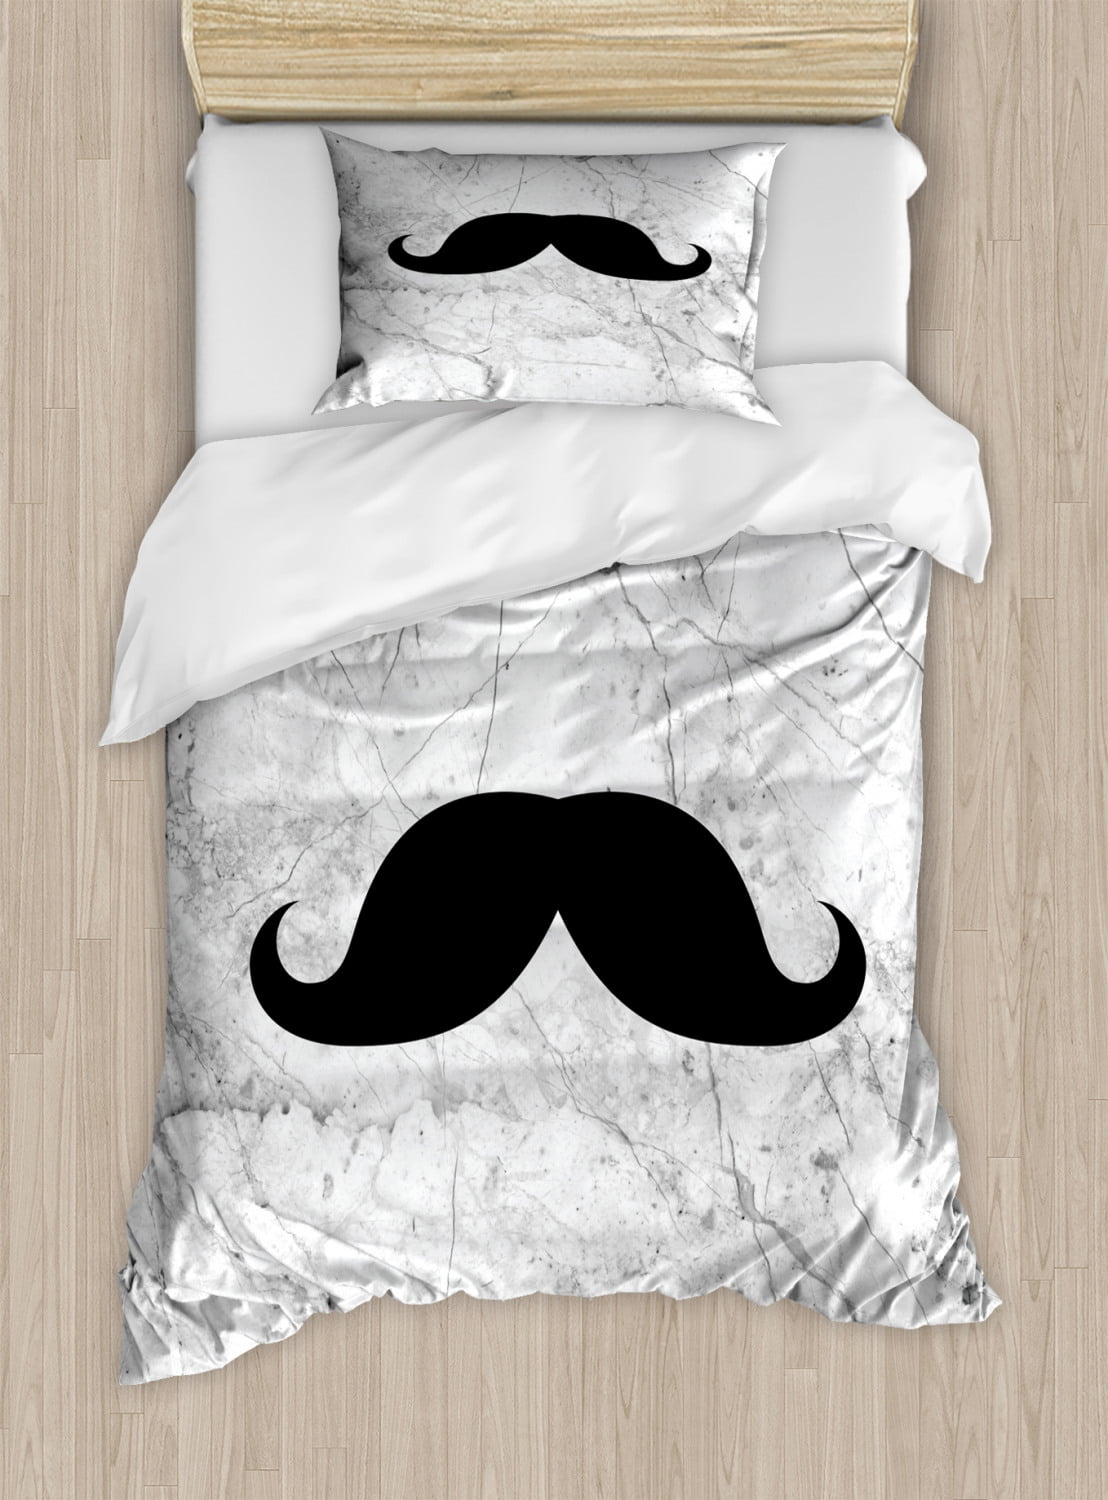 Manly Duvet Cover Set Mustache Motif On Cracked Weathered Marble